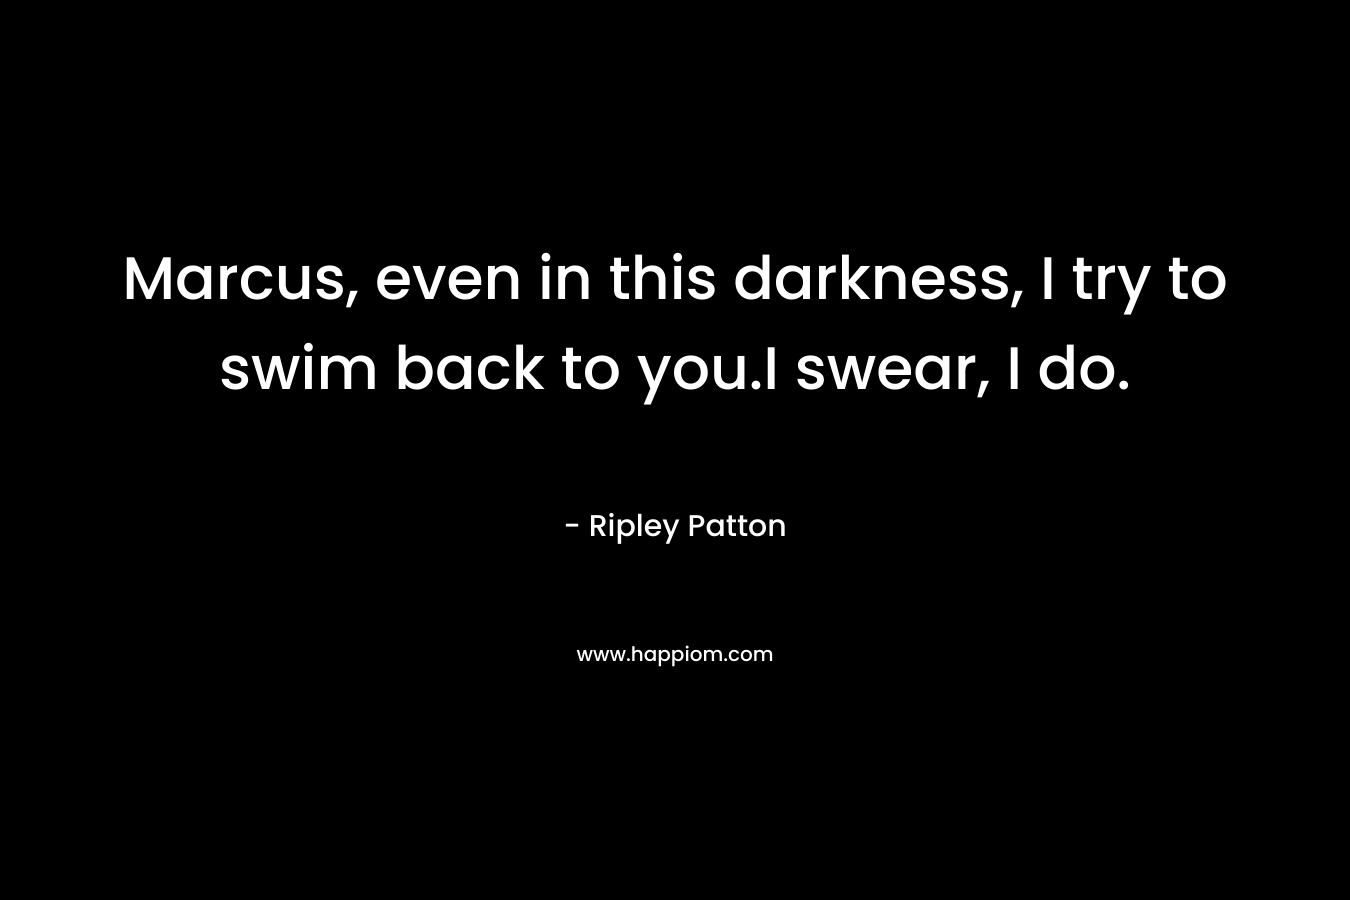 Marcus, even in this darkness, I try to swim back to you.I swear, I do. – Ripley Patton